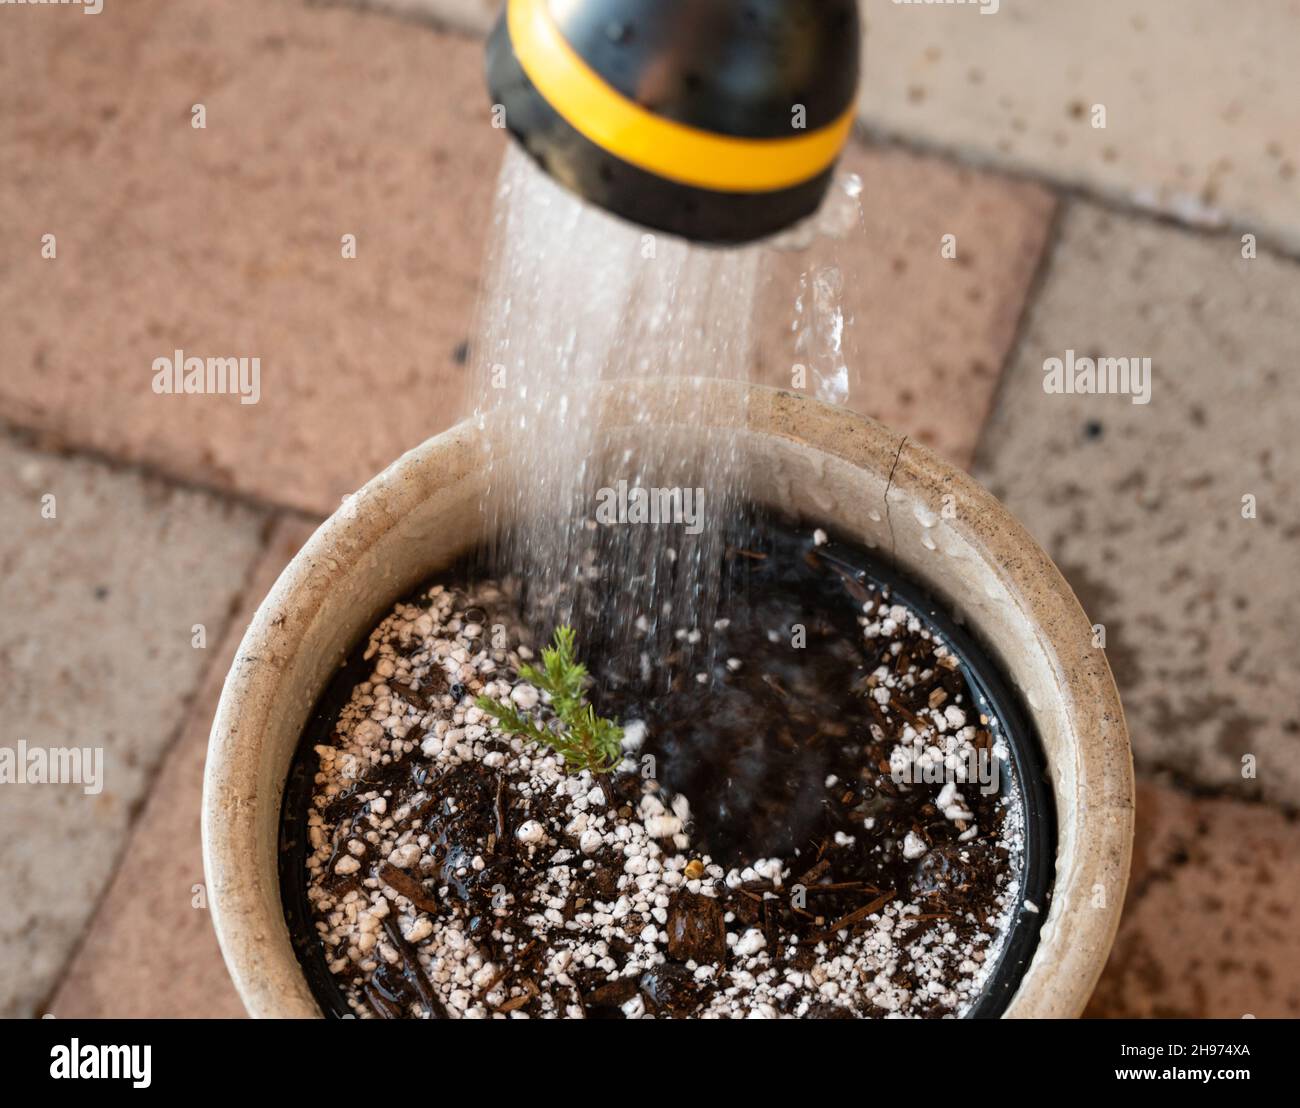 Watering a young Sequoia tree sapling Stock Photo